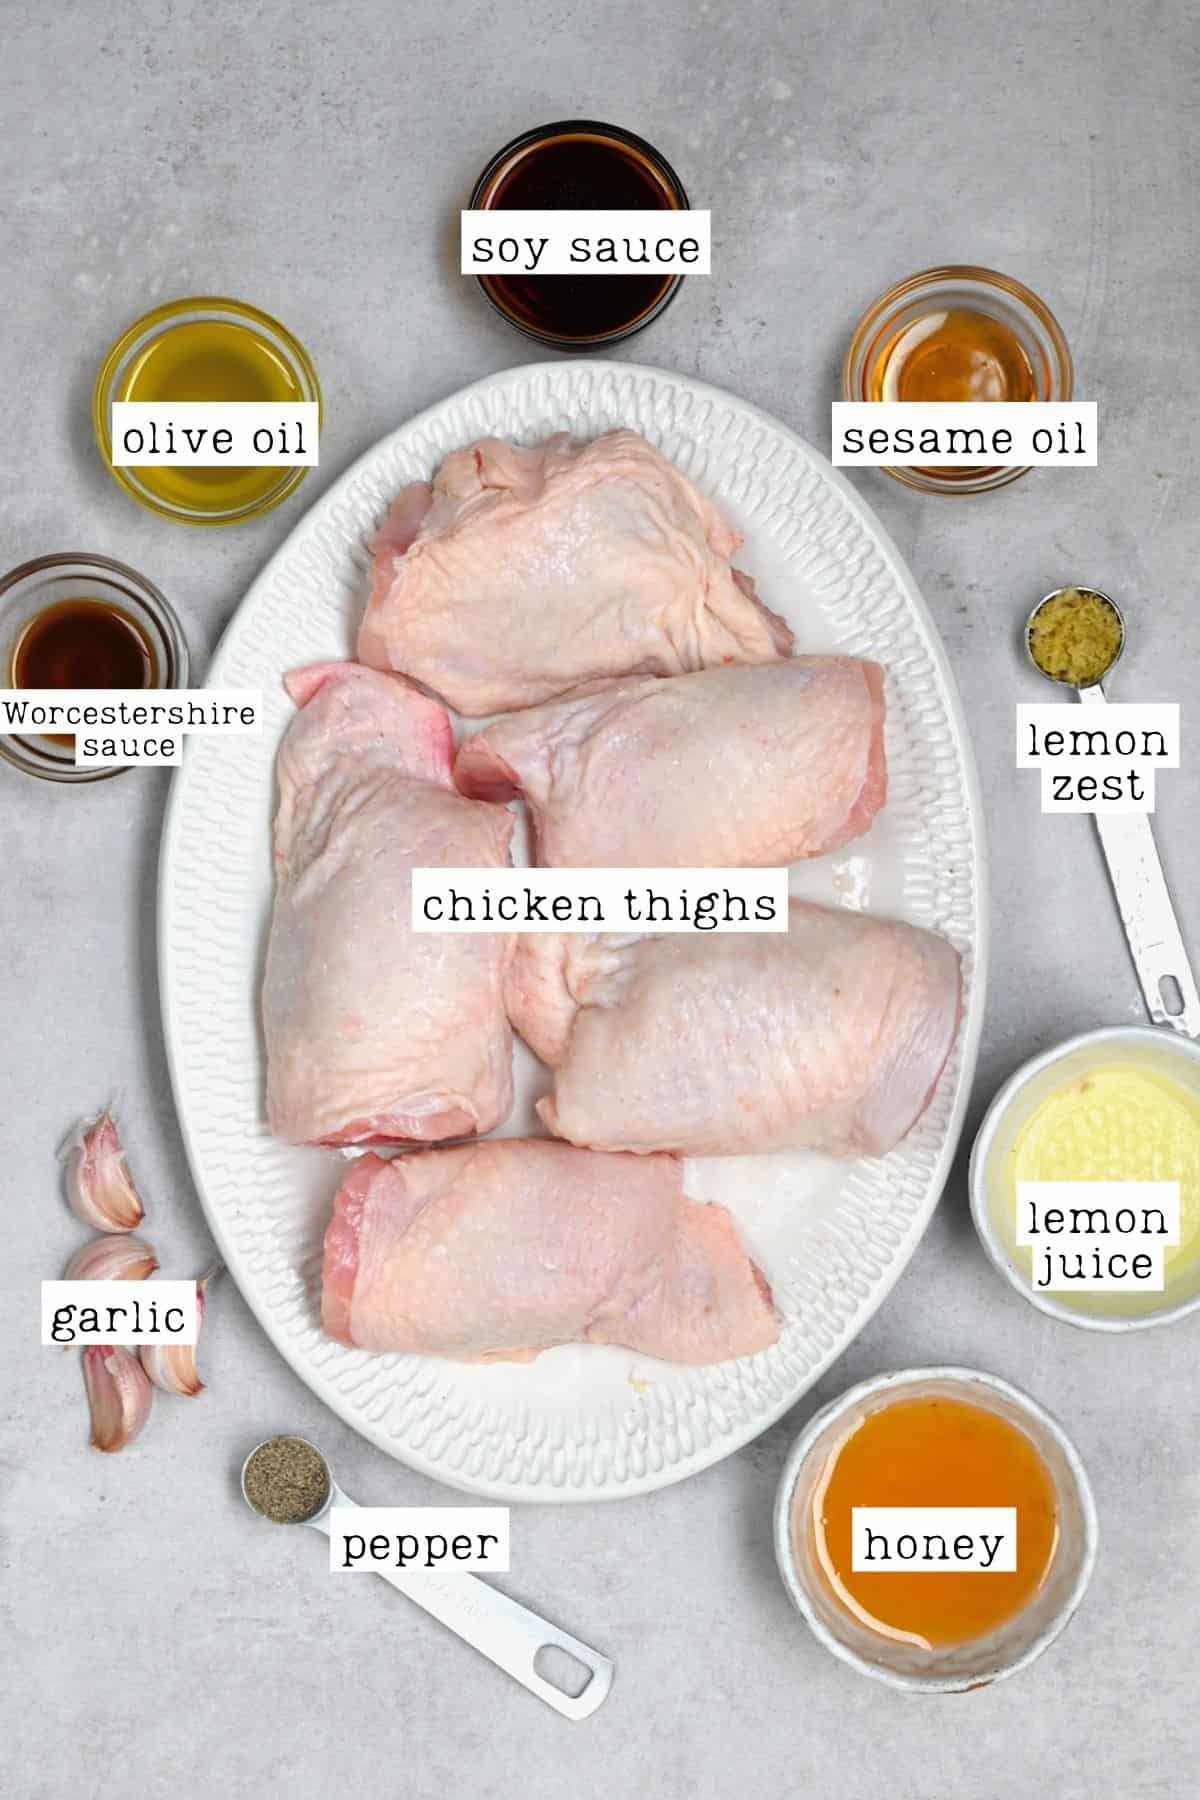 Ingredients for grilled chicken thighs